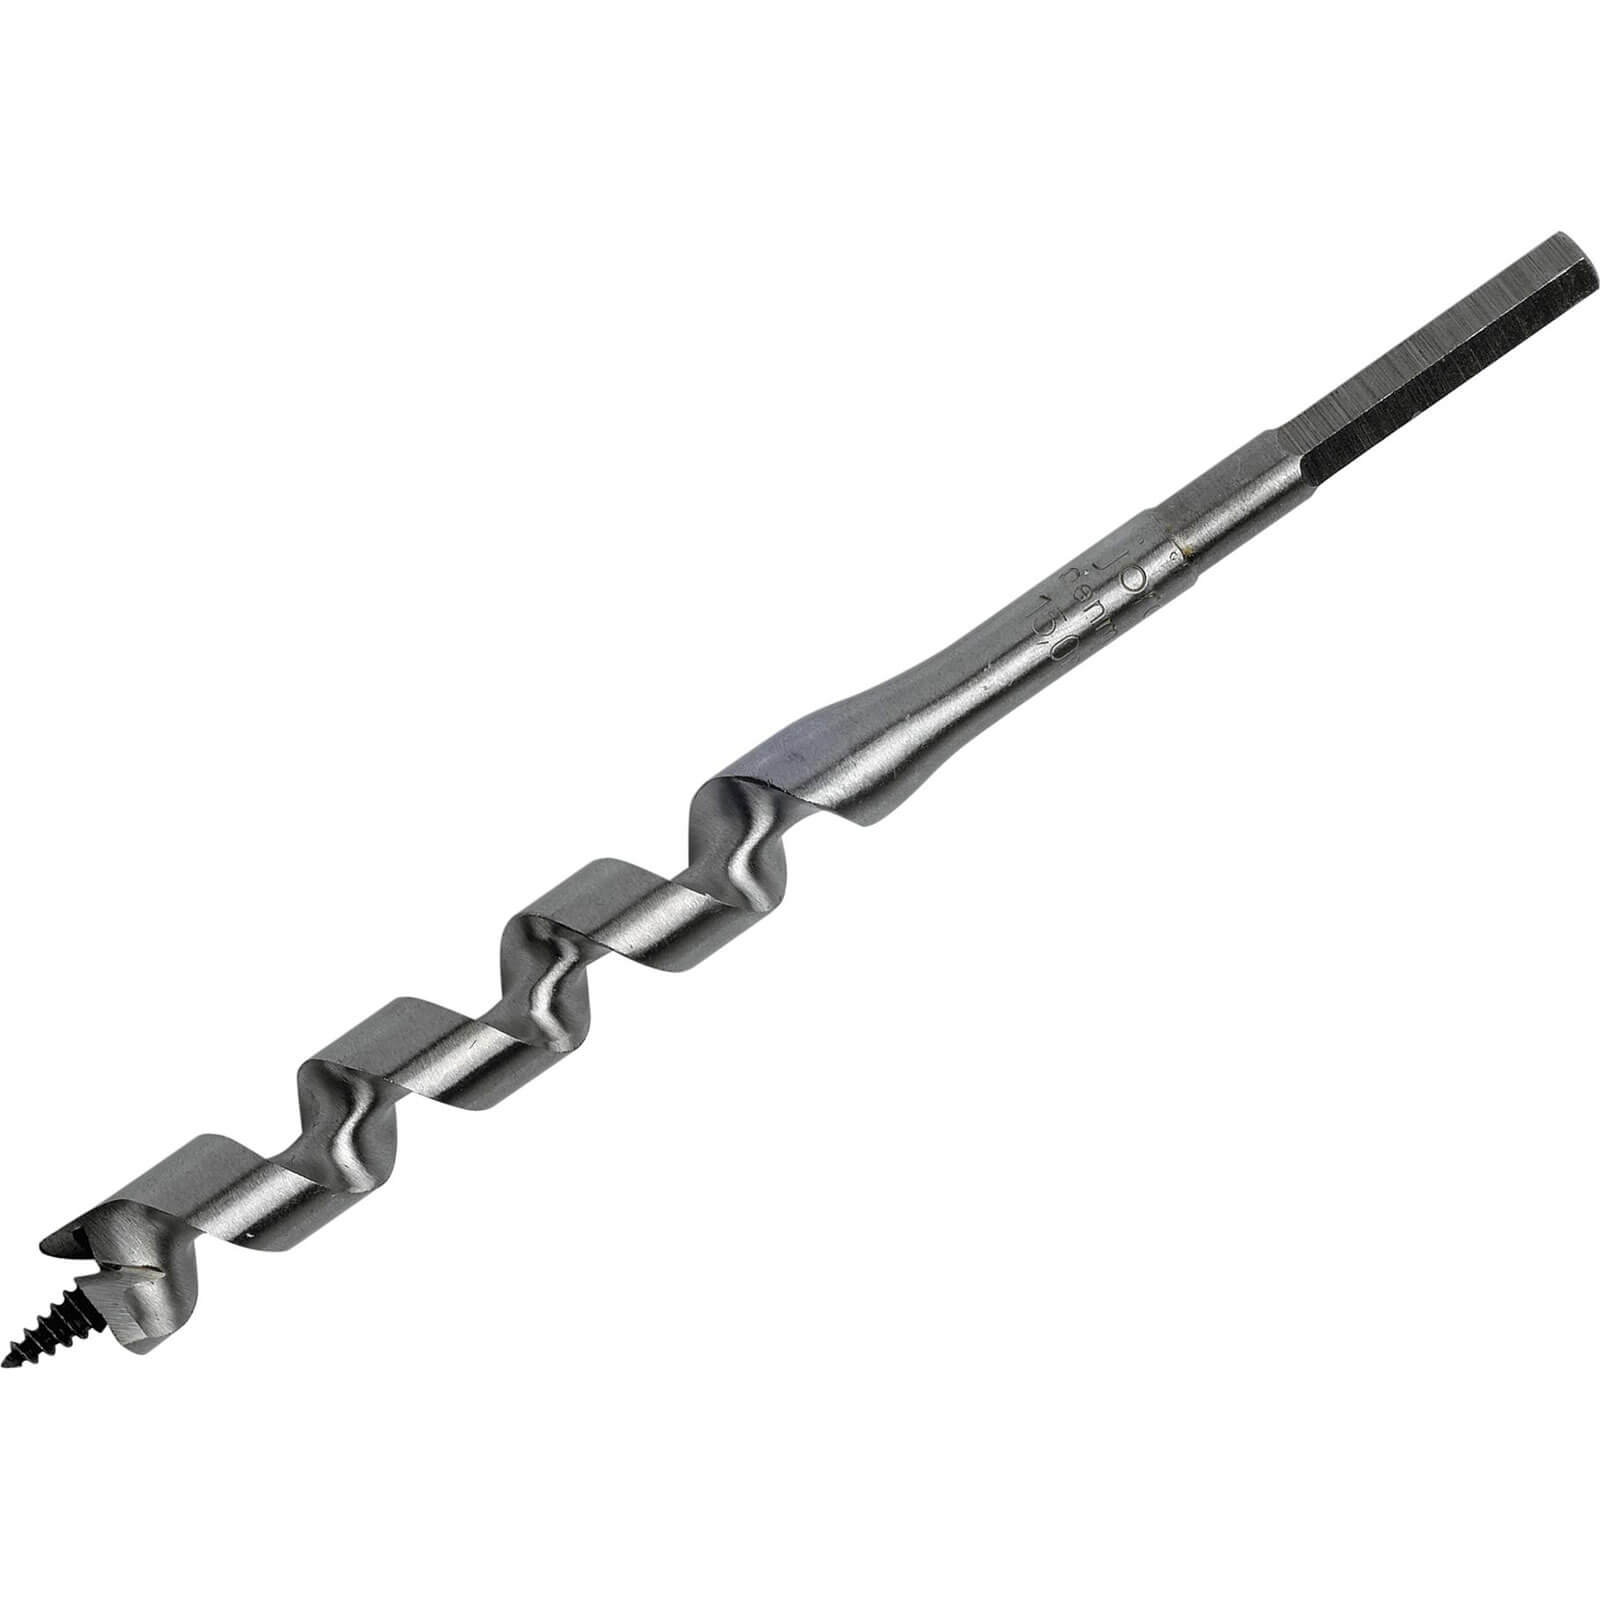 Image of Irwin Wood Auger Drill Bit 10mm 191mm